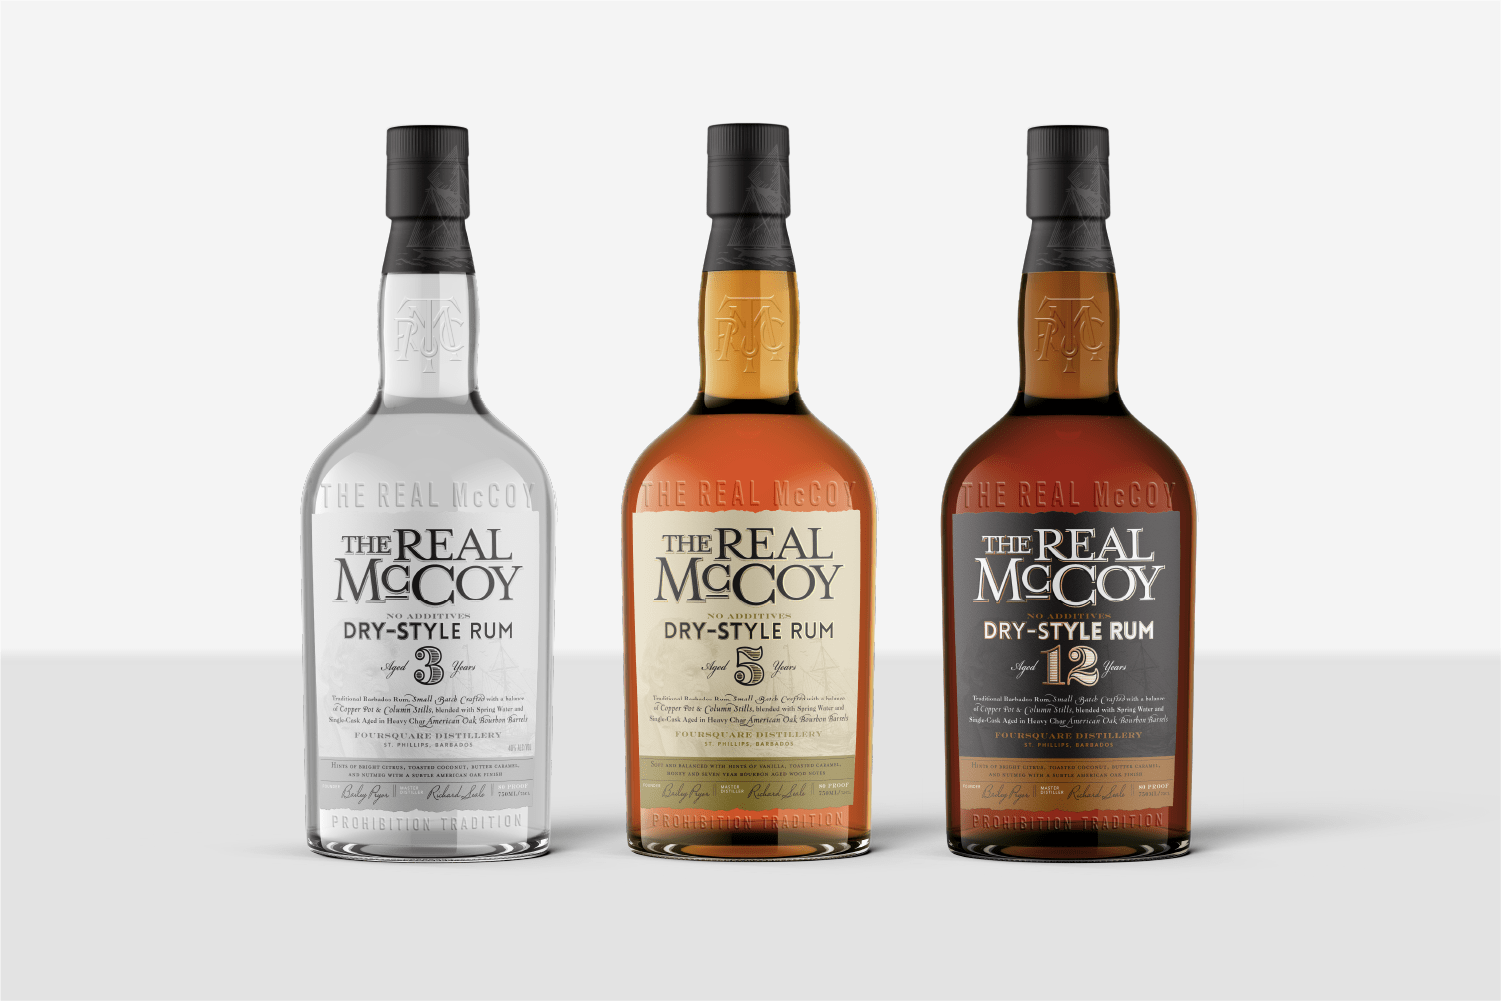 he Real McCoy bottle and label design concept for 3 year, 5 year and 12 year aged Rum.